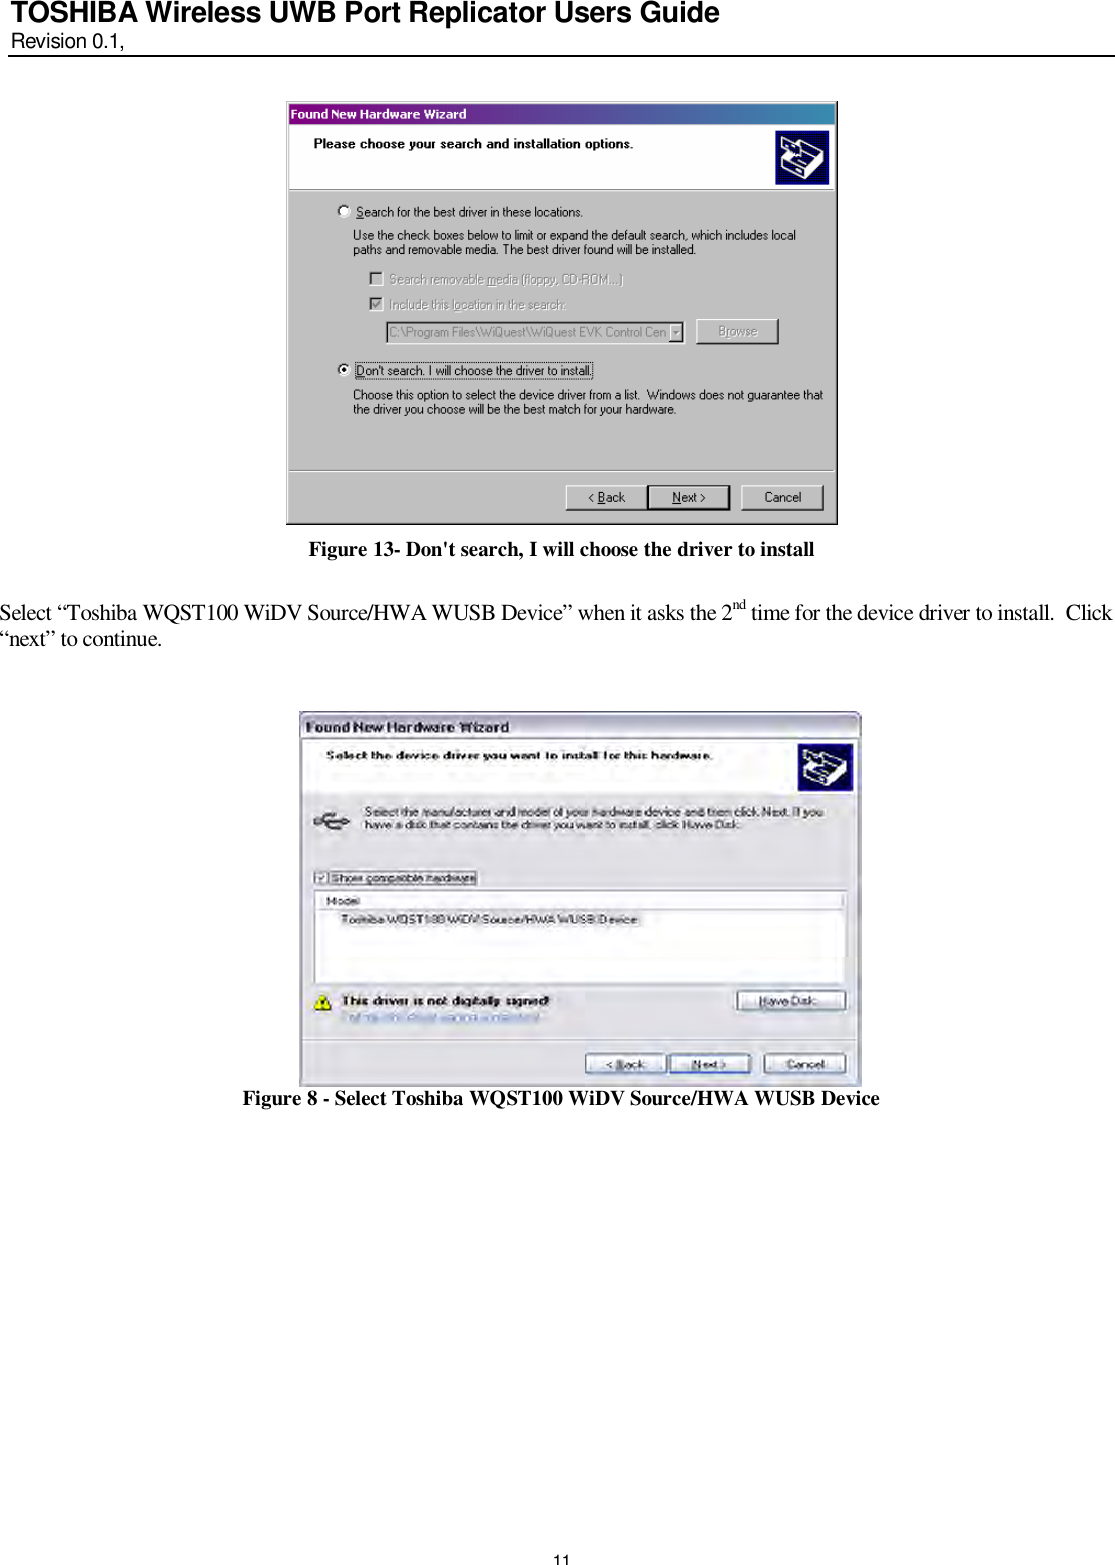   11 TOSHIBA Wireless UWB Port Replicator Users Guide Revision 0.1,    Figure 13- Don&apos;t search, I will choose the driver to install  Select “Toshiba WQST100 WiDV Source/HWA WUSB Device” when it asks the 2nd time for the device driver to install.  Click “next” to continue.                 Figure 8 - Select Toshiba WQST100 WiDV Source/HWA WUSB Device                 